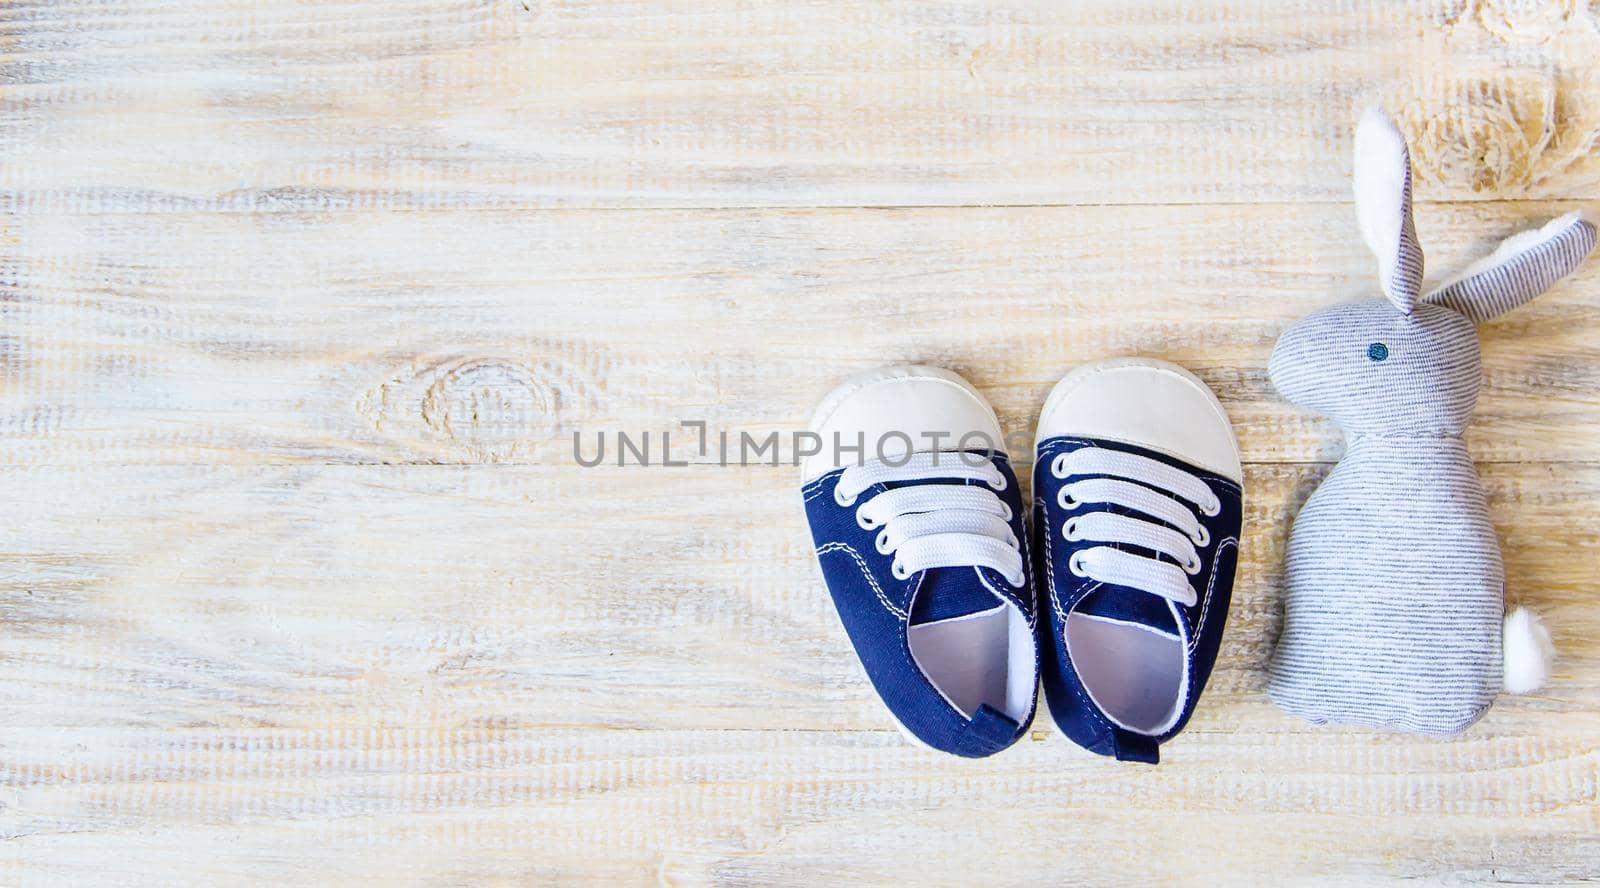 Baby booties and accessories on a light background. Selective focus.